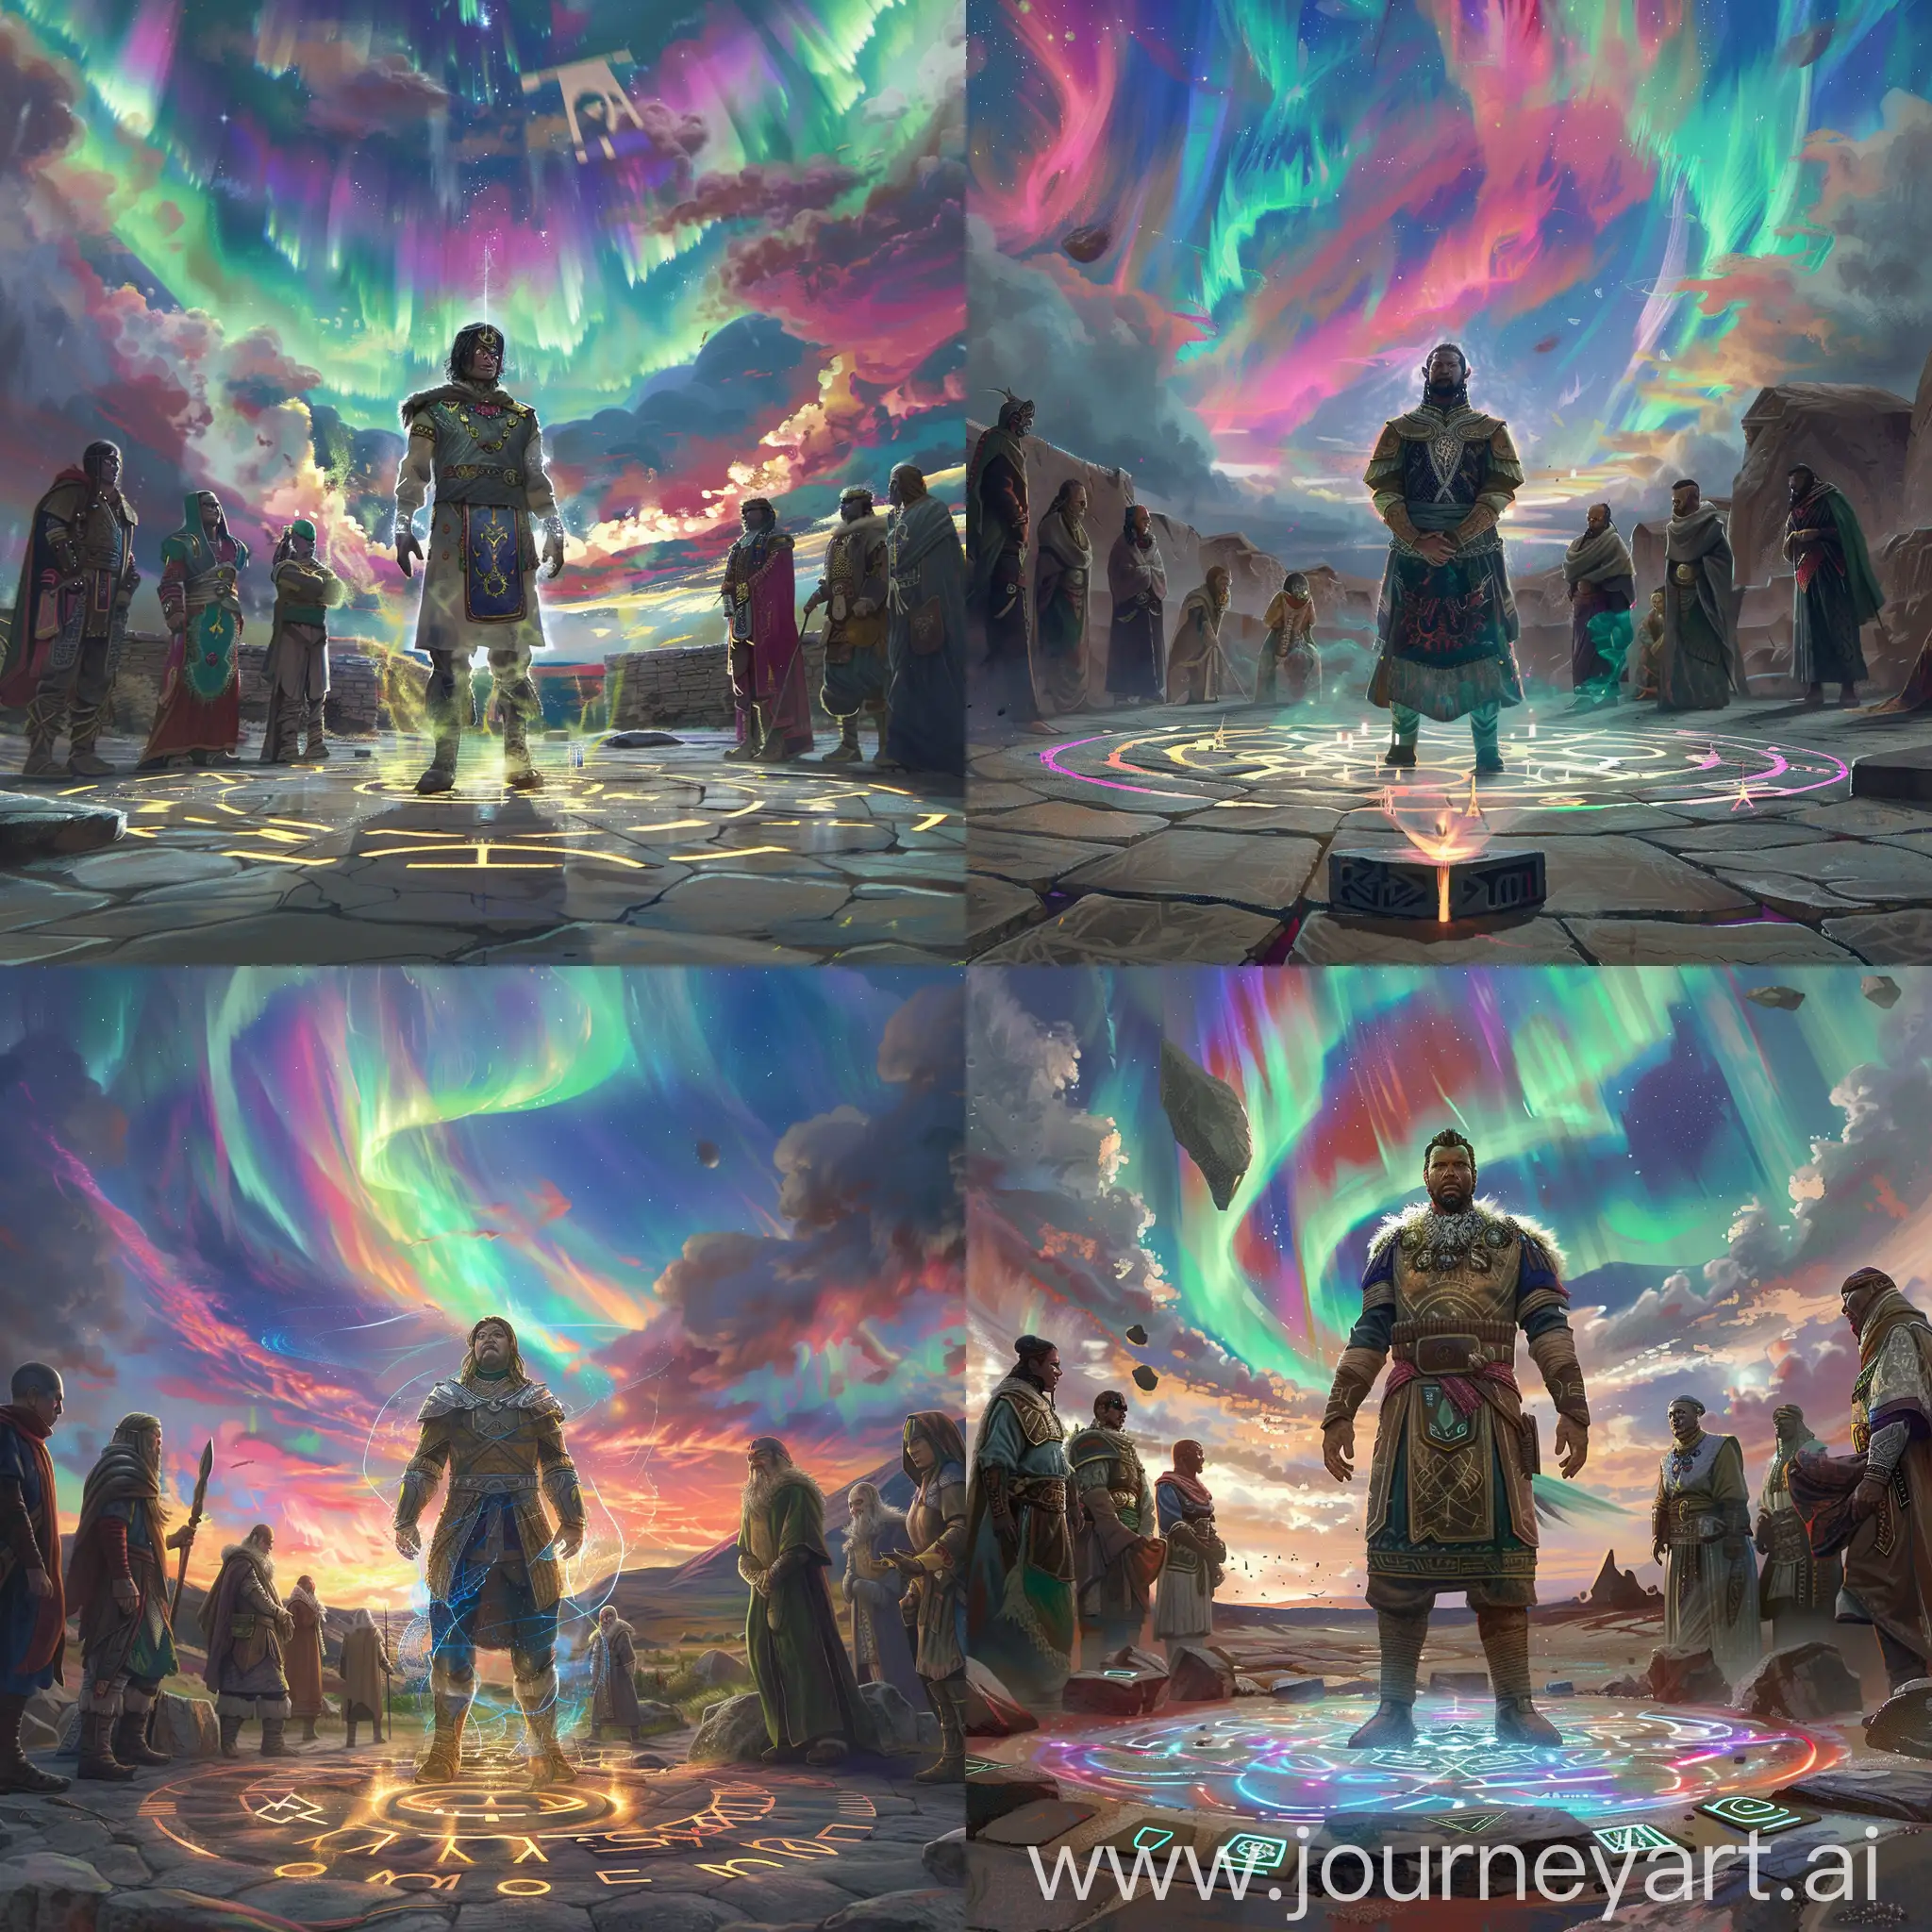 Thorgal in a ceremonial outfit, partaking in a mystical rite of passage under the aurora of his home planet. He stands at the center of a stone circle, with alien runes glowing on the ground. Above, the sky swirls with colors unknown to Earth, reflecting his connection to both the physical and spiritual worlds. His posture is respectful and solemn, surrounded by elders in traditional garb, signifying a pivotal moment in his life. Created Using: ethereal lighting, vibrant sky palette, detailed ceremonial wear, soft focus on background figures, high detail on alien runes, digital art medium --ar 1:1 --v 6.0